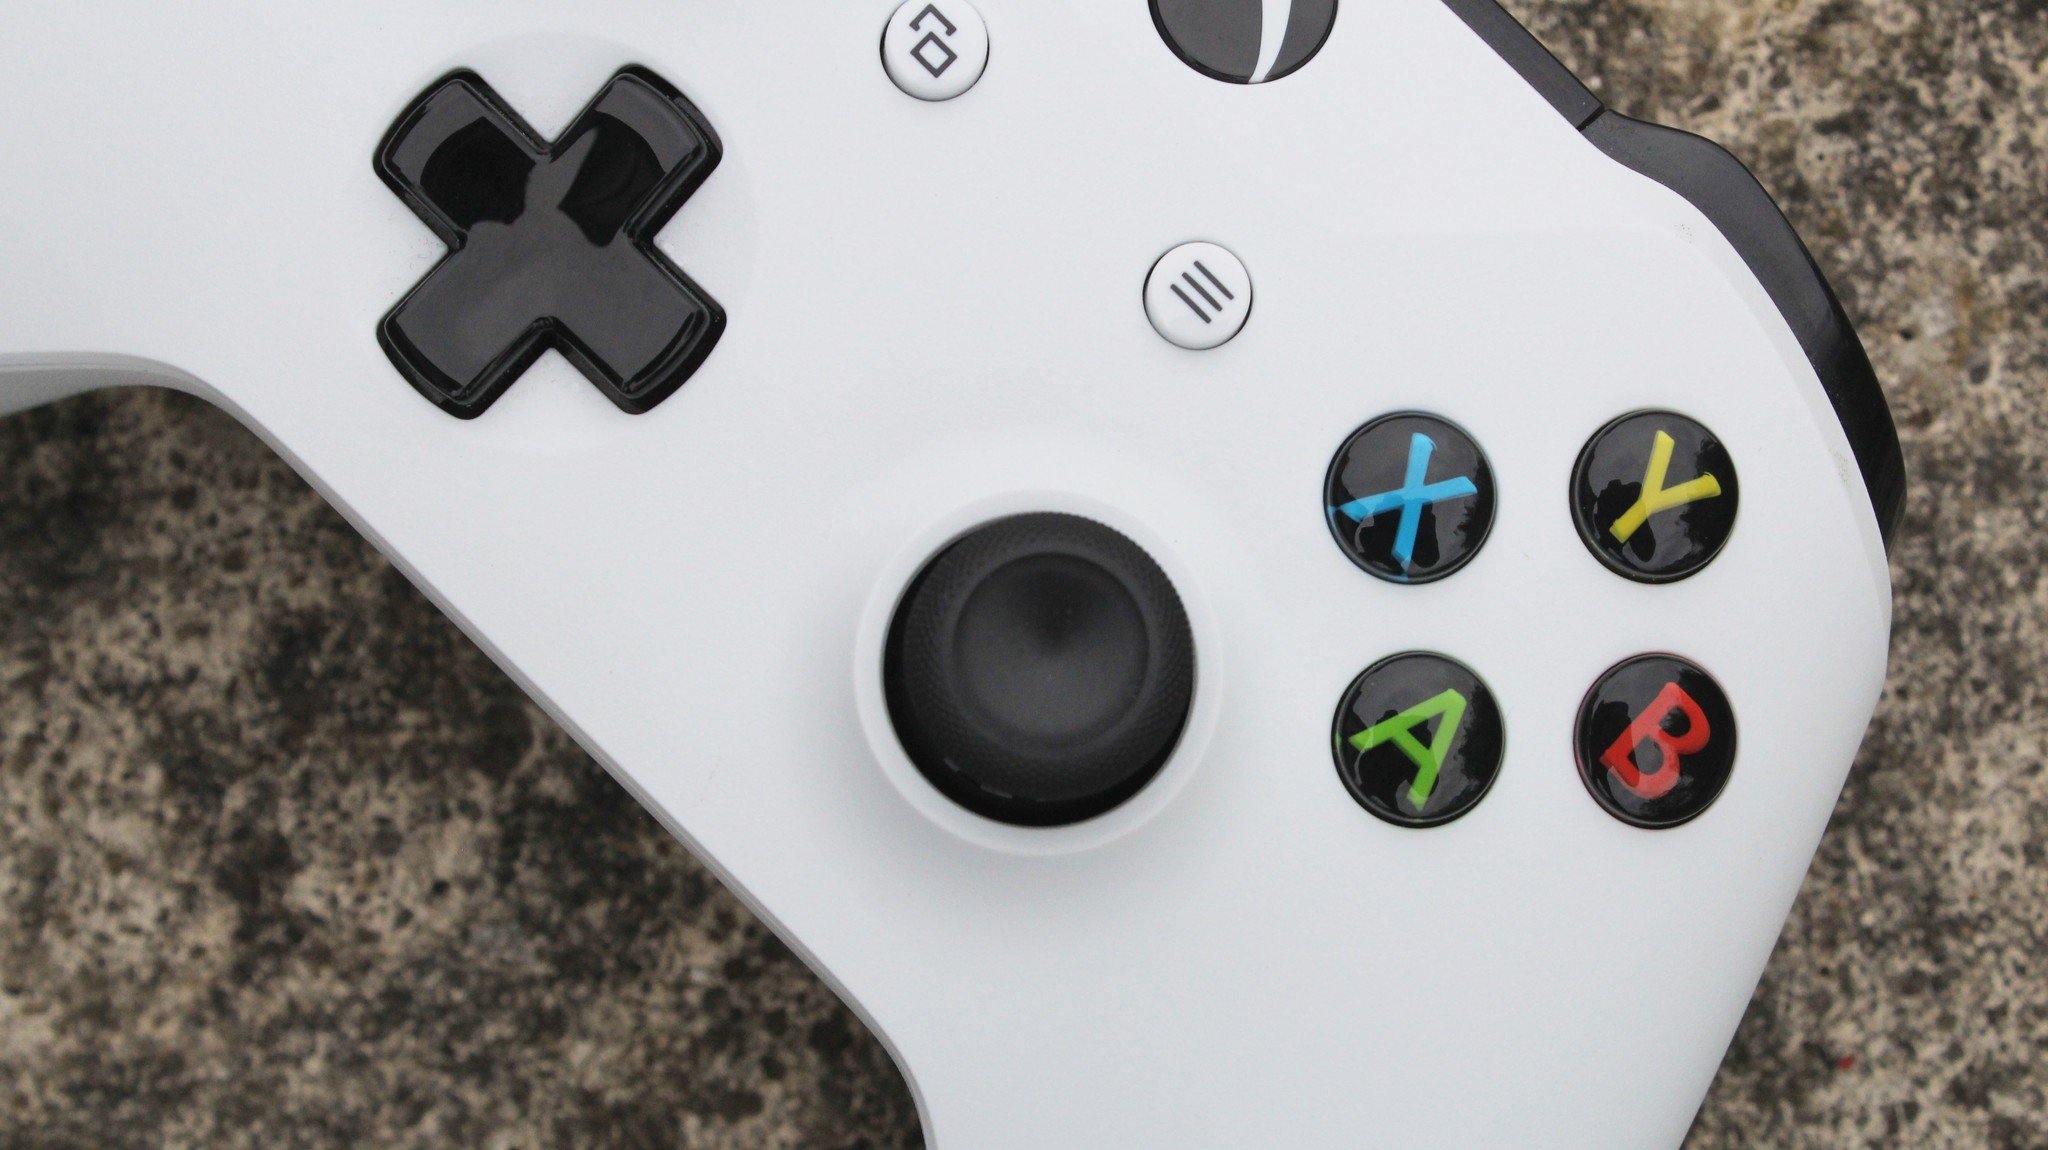 falanks uvidenhed en anden How to use an Xbox controller on Android | Android Central